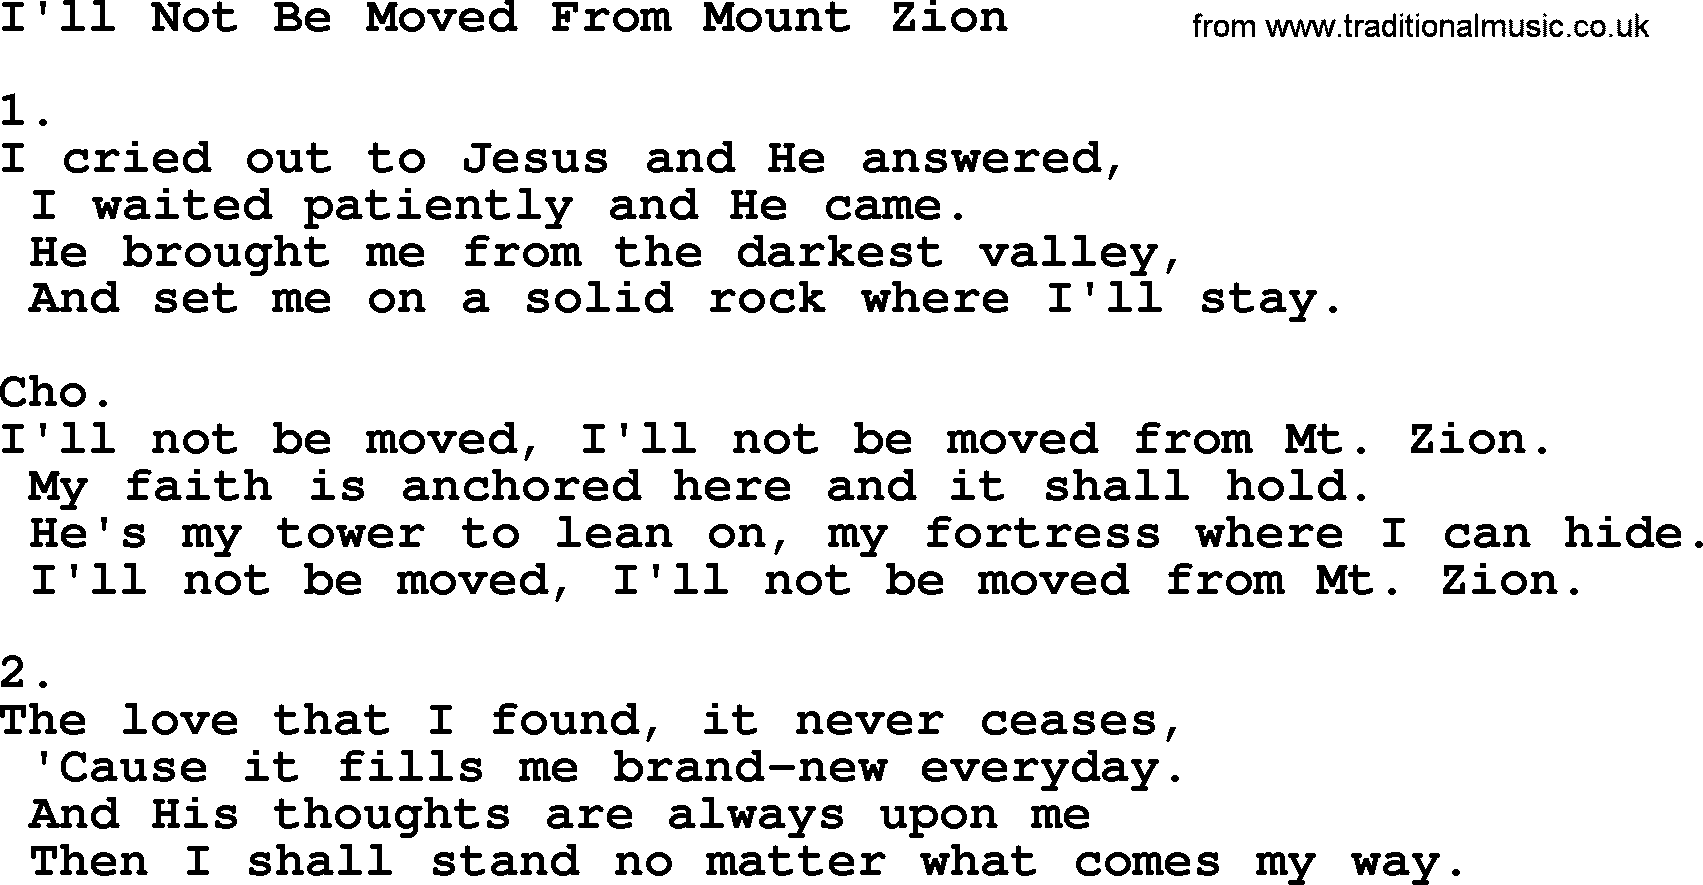 Apostolic & Pentecostal Hymns and Songs, Hymn: I'll Not Be Moved From Mount Zion lyrics and PDF